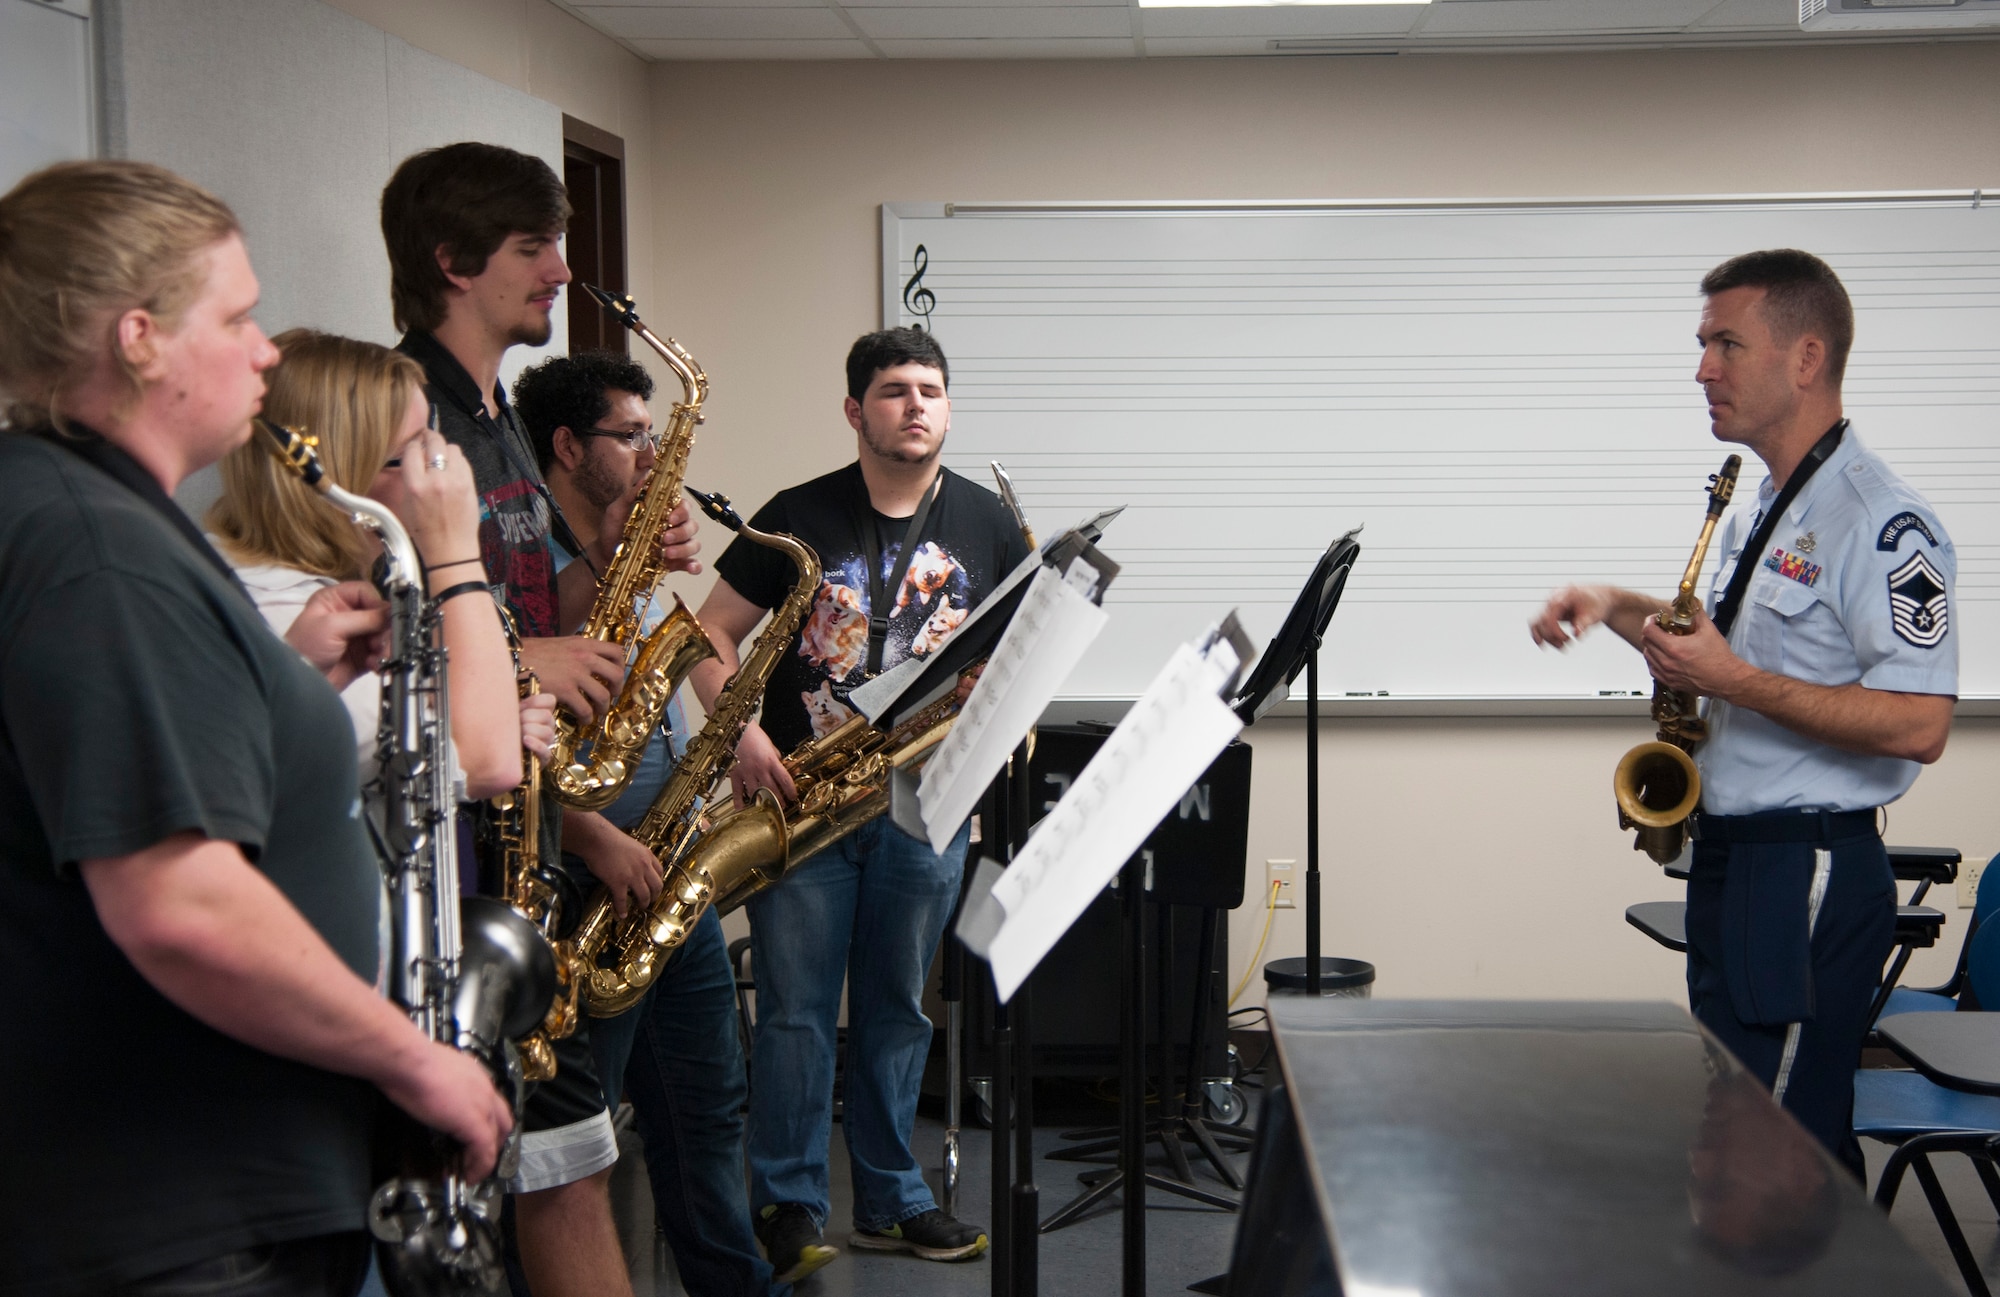 Senior Master Sgt. Tyler Kuebler, the director of the Airmen of Note and a saxophone player, teaches some of the finer points of playing saxophone for a big jazz ensemble during an Advancing Innovation through Music Outreach April 25 at Lamar University in Beaumont, Texas. (U.S. Air Force photo by Tech. Sgt. James Bolinger)